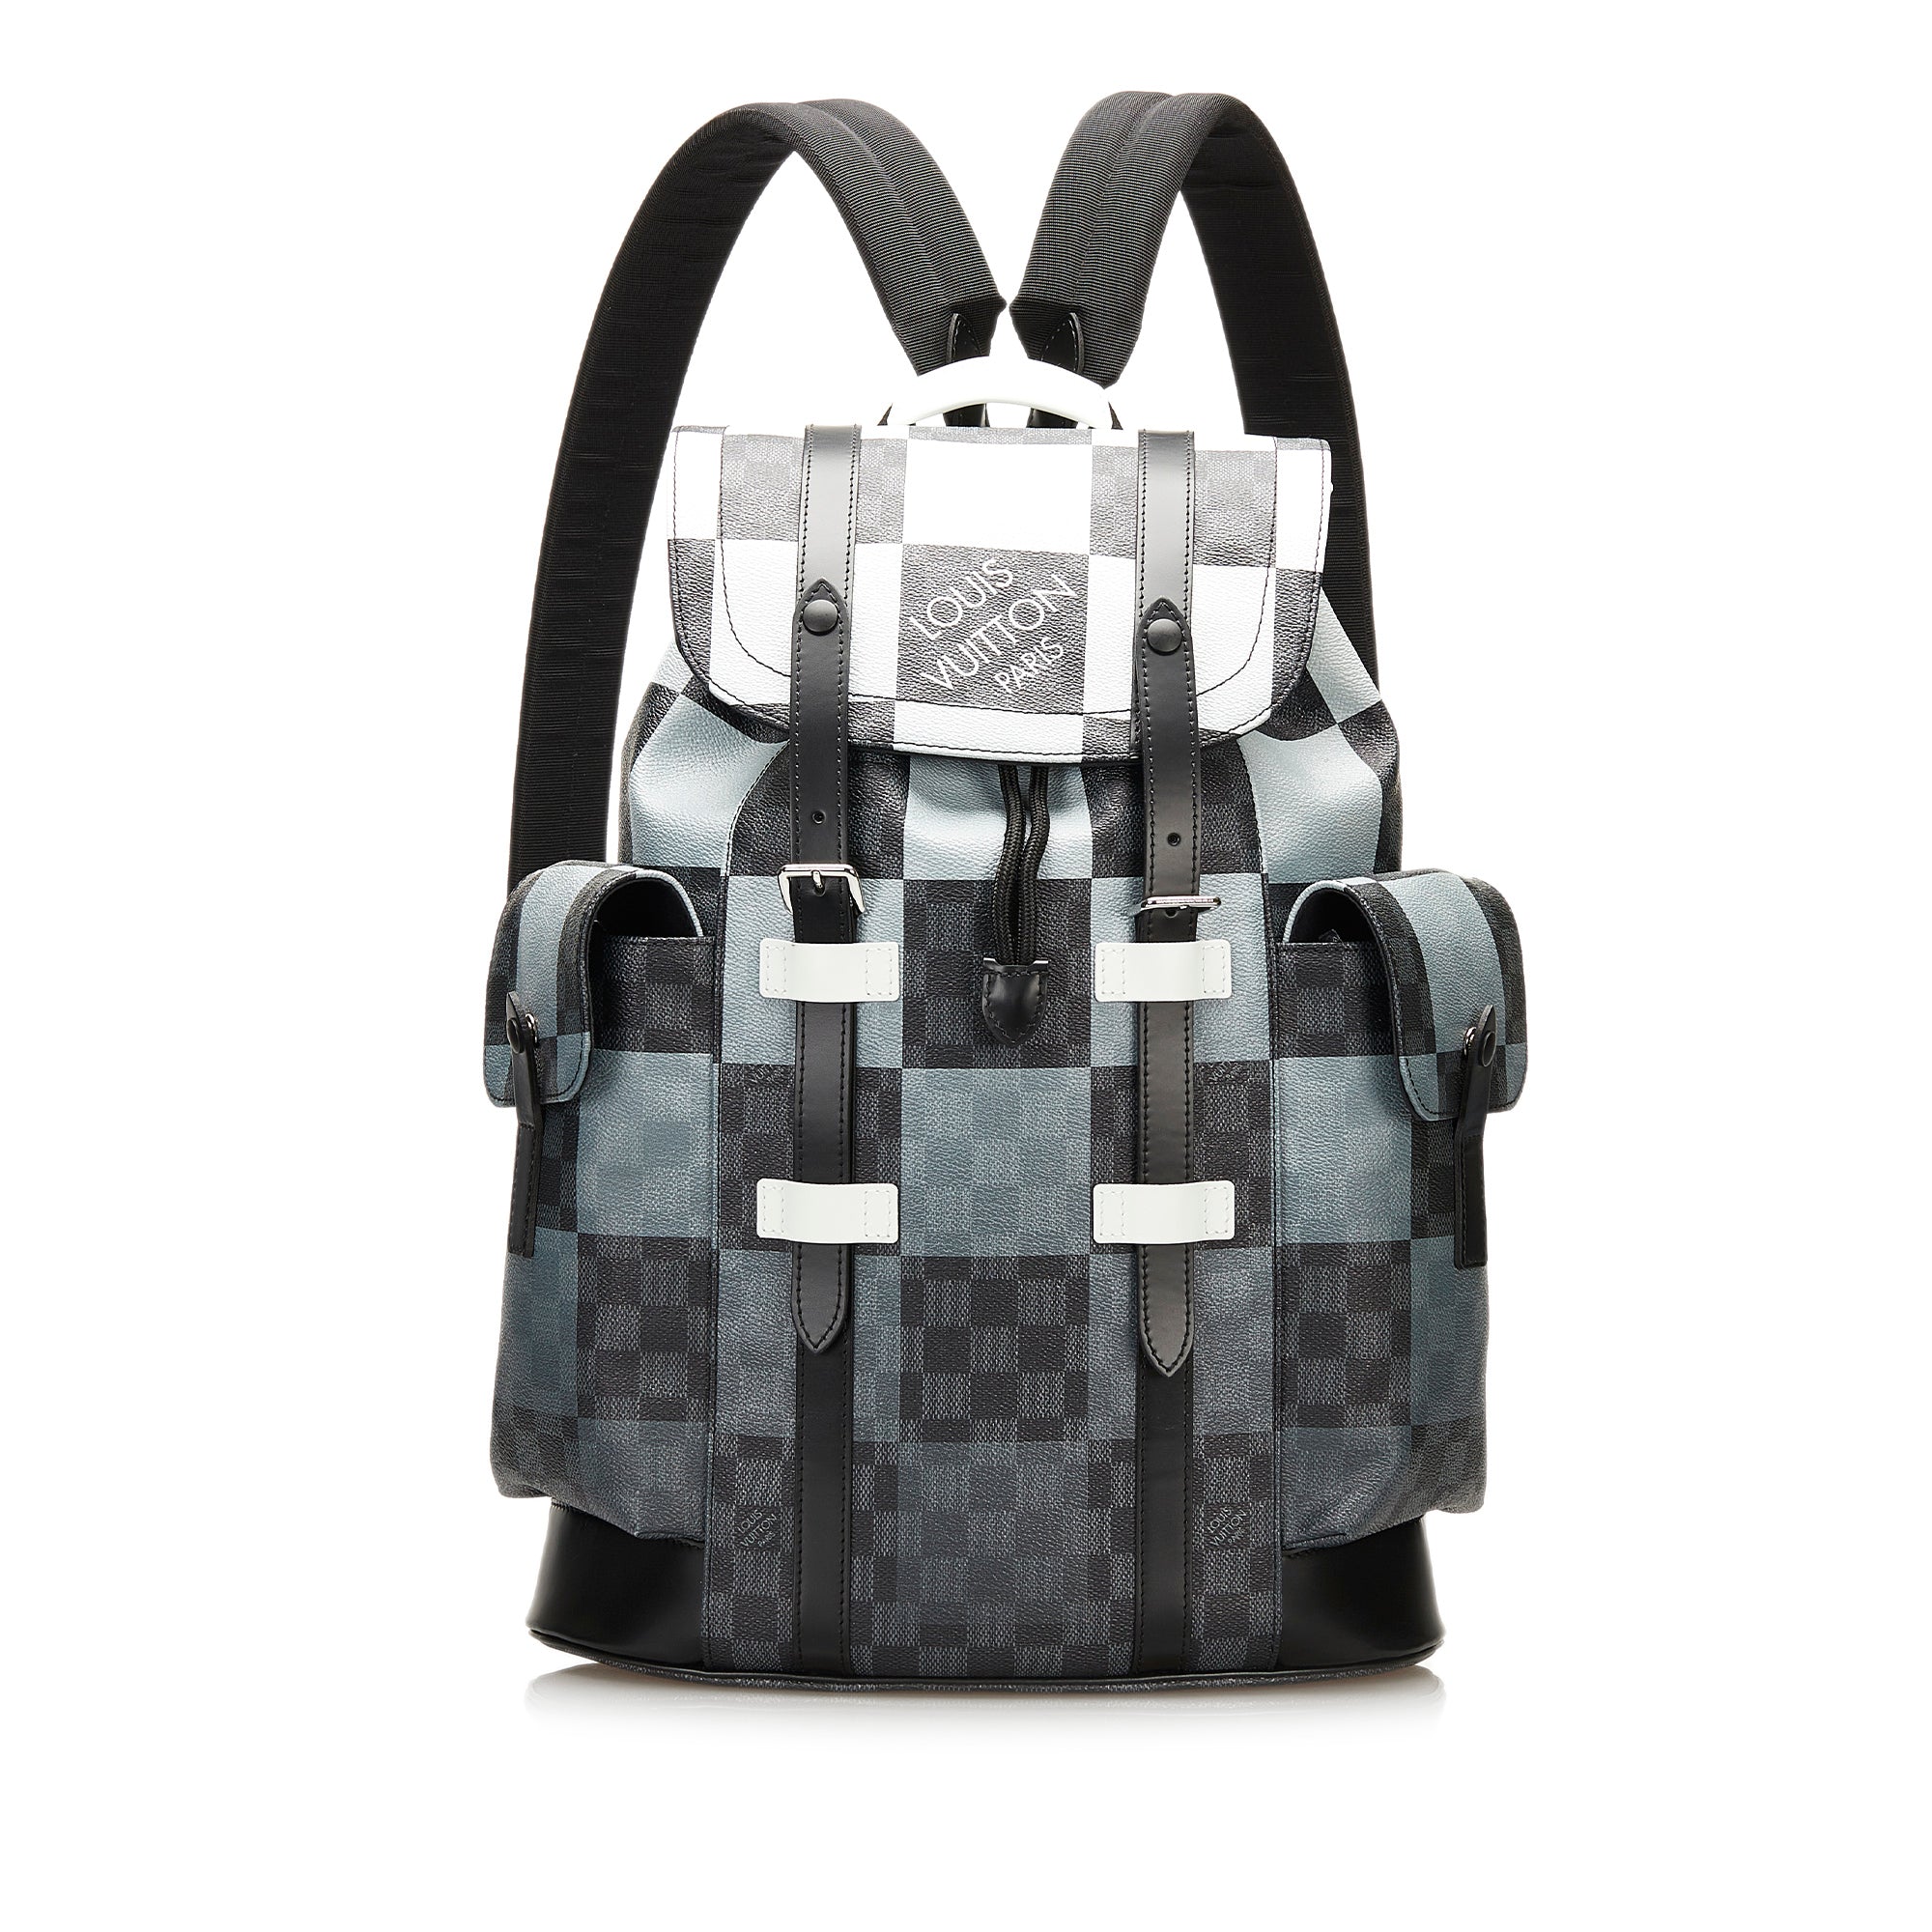 Louis Vuitton Christopher Backpack Limited Edition Distorted Damier Black  224646225